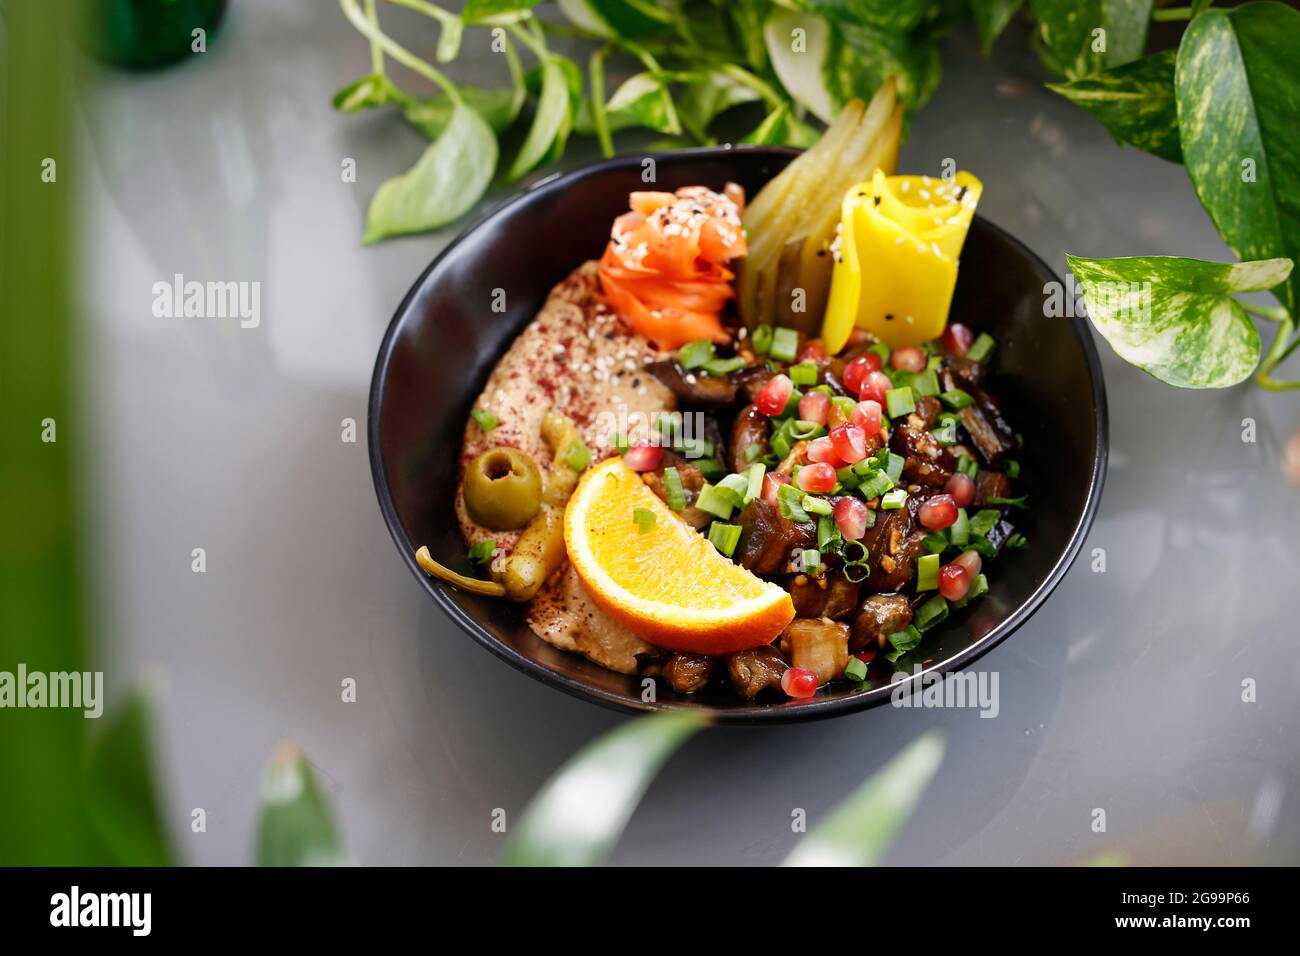 Humus with a patch of mushrooms and vegetables. Vegetarian dish, food photography, serving proposal. Stock Photo